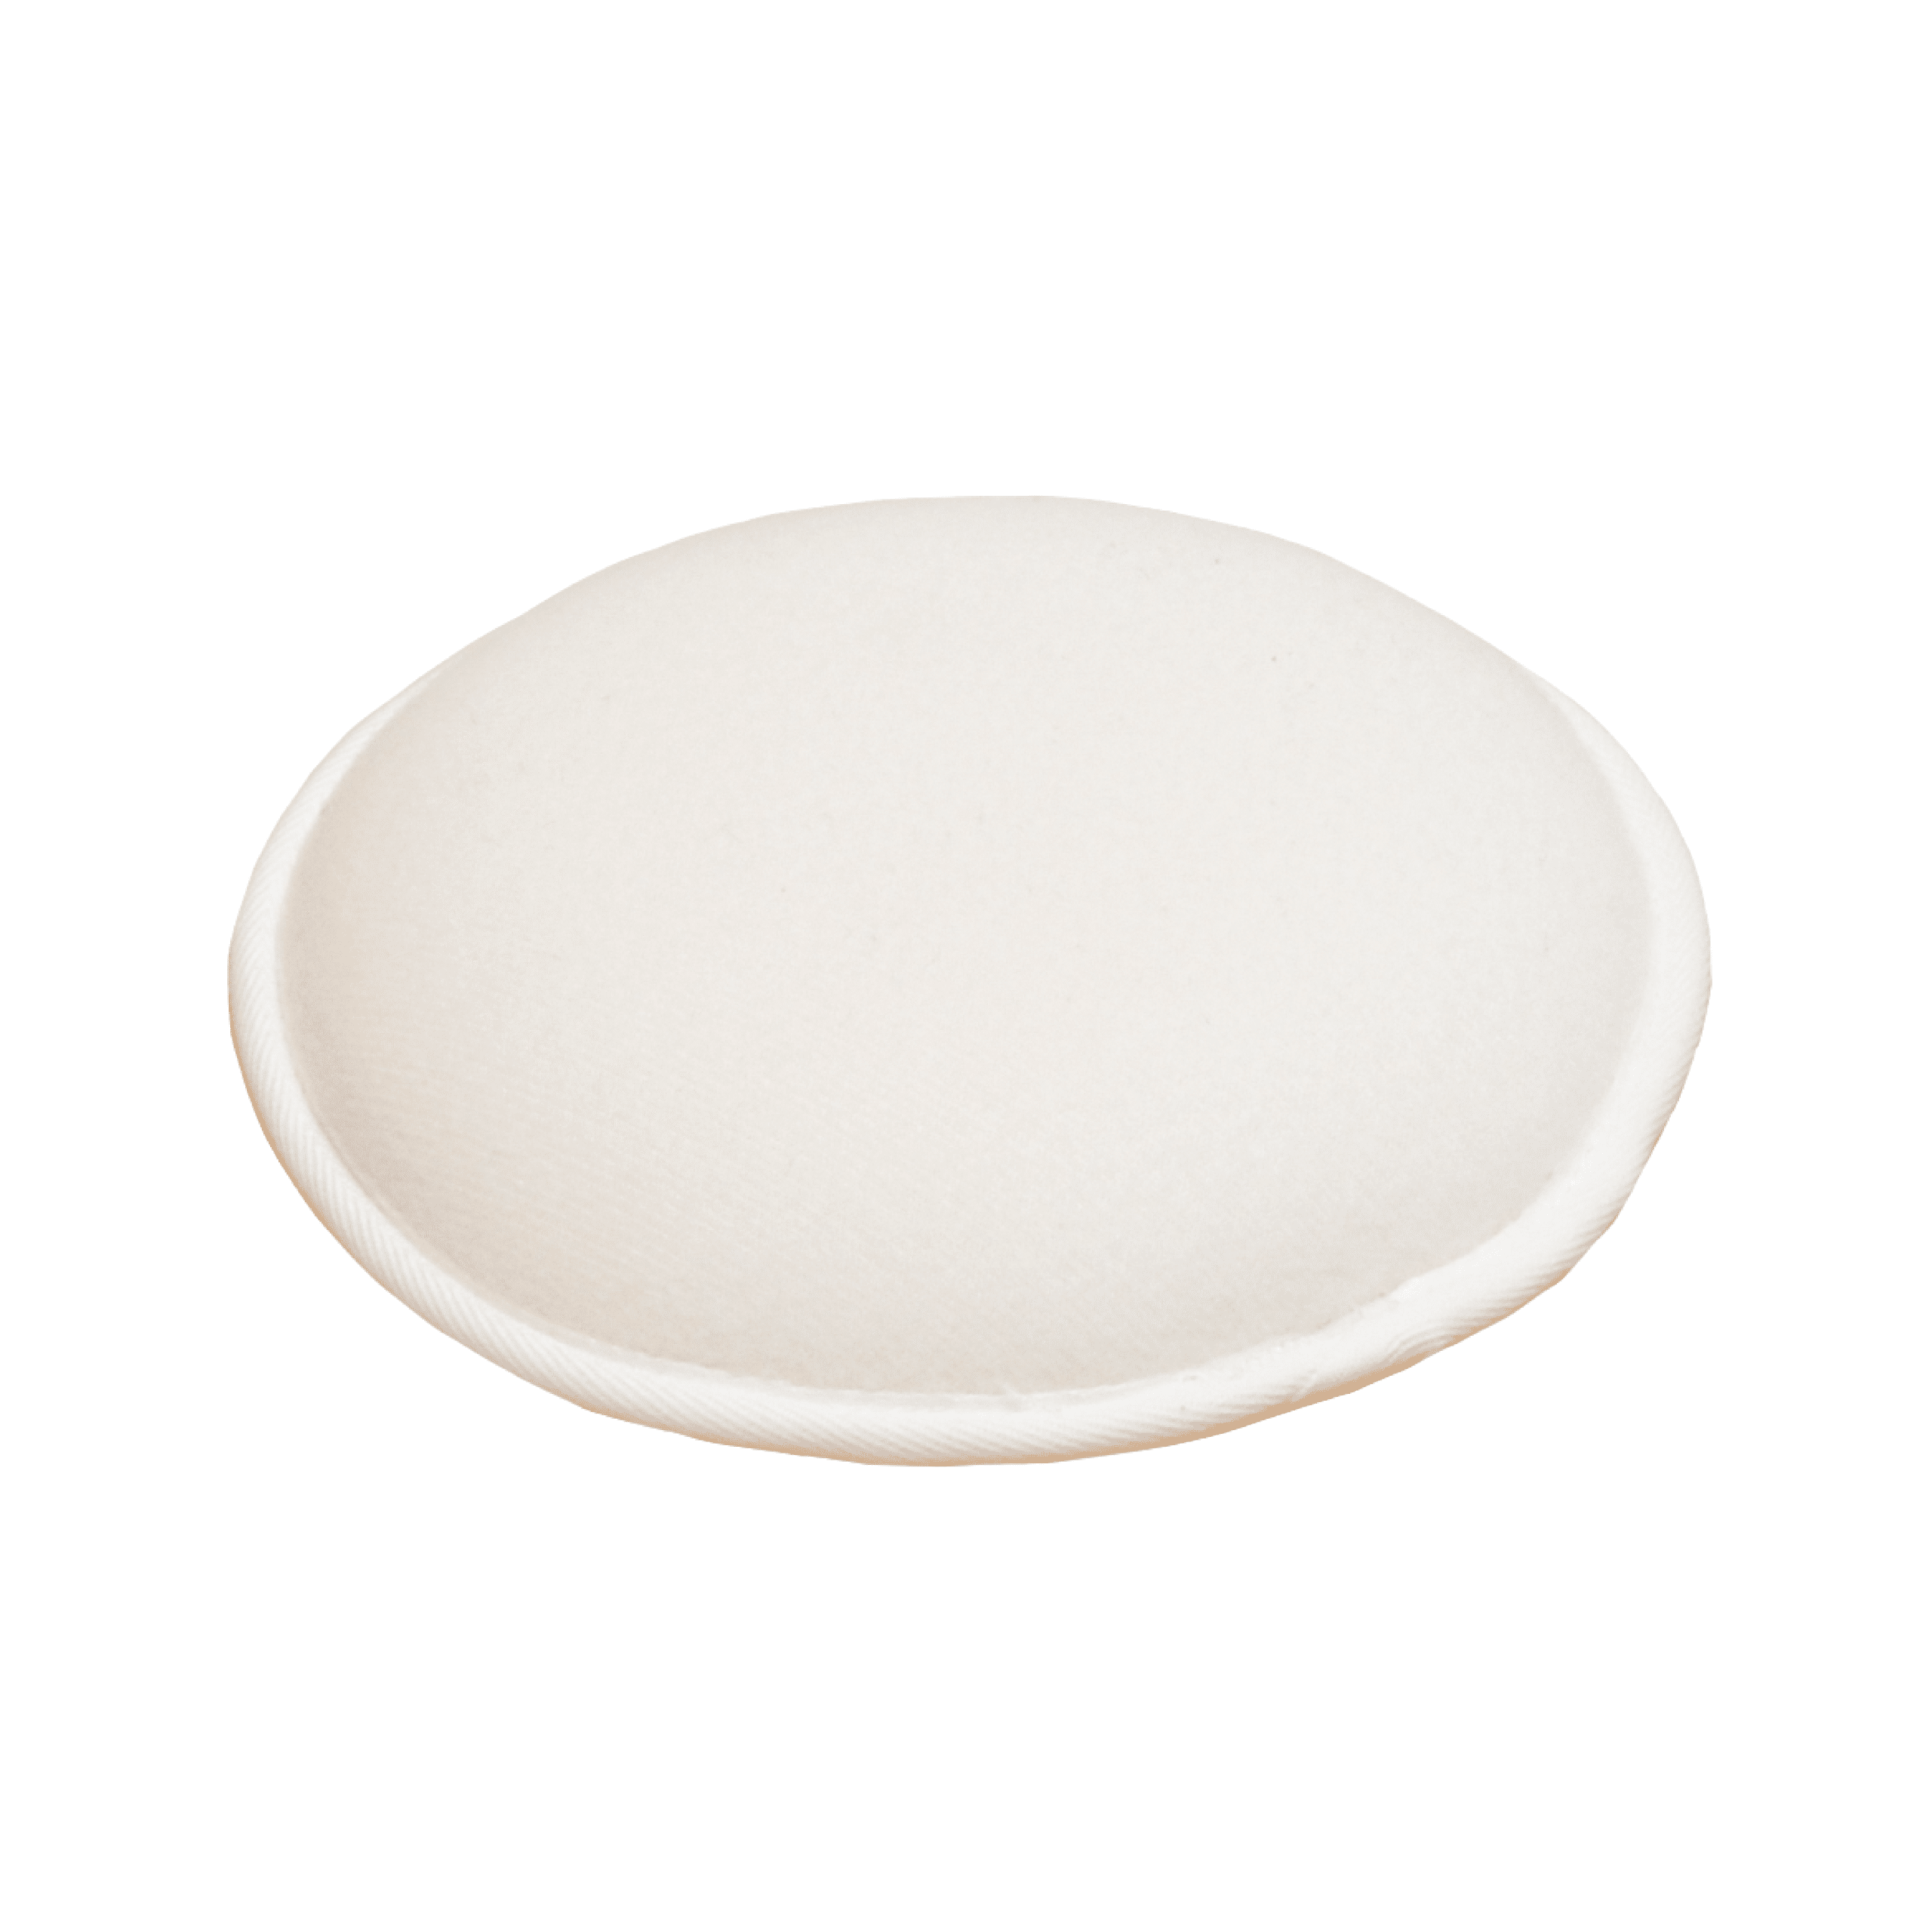 Express Orthopaedic® Hernia Containment Pad